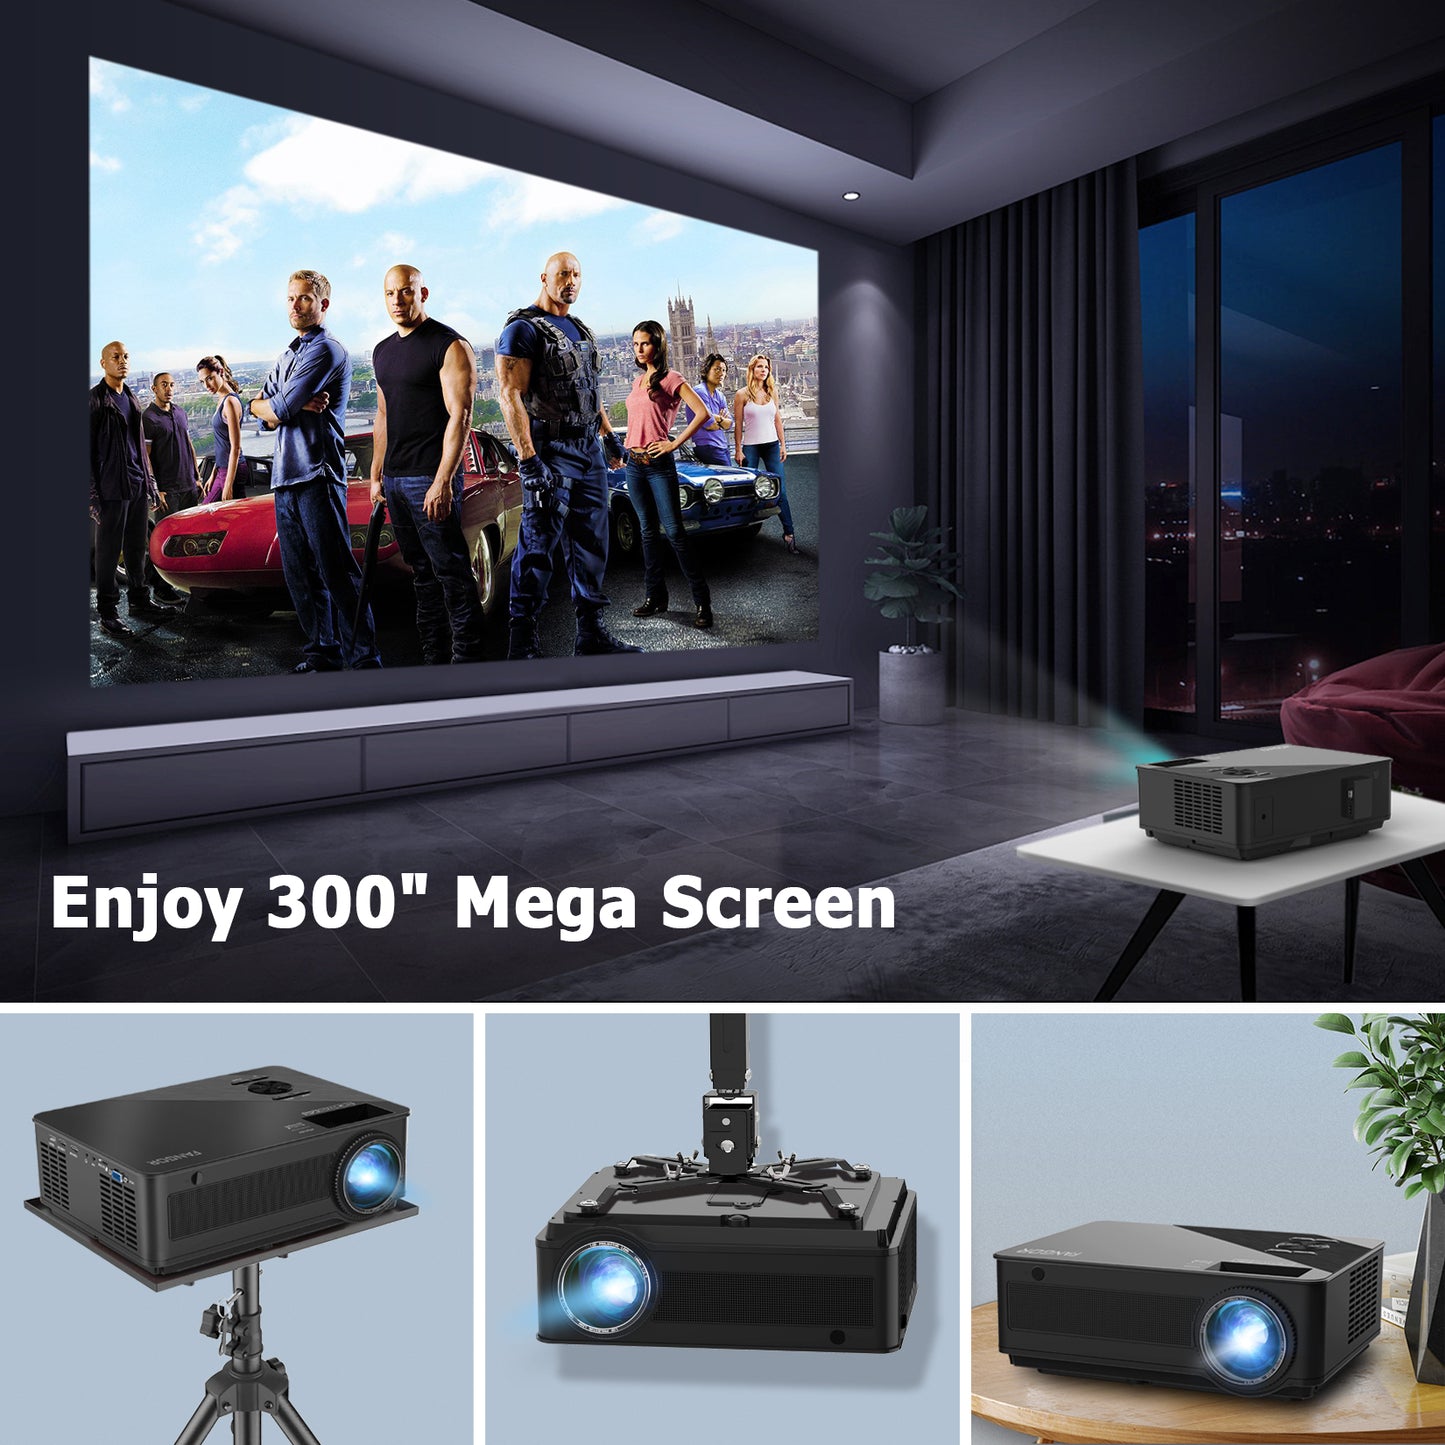 Native 1080P WiFi Projector - Outdoor Movie Projector with 100'' Projection Screen Included, FANGOR Bluetooth Projector 4K-Supported Video Projector, Compatible with Phones, Laptops, DVD, HDMI, USB